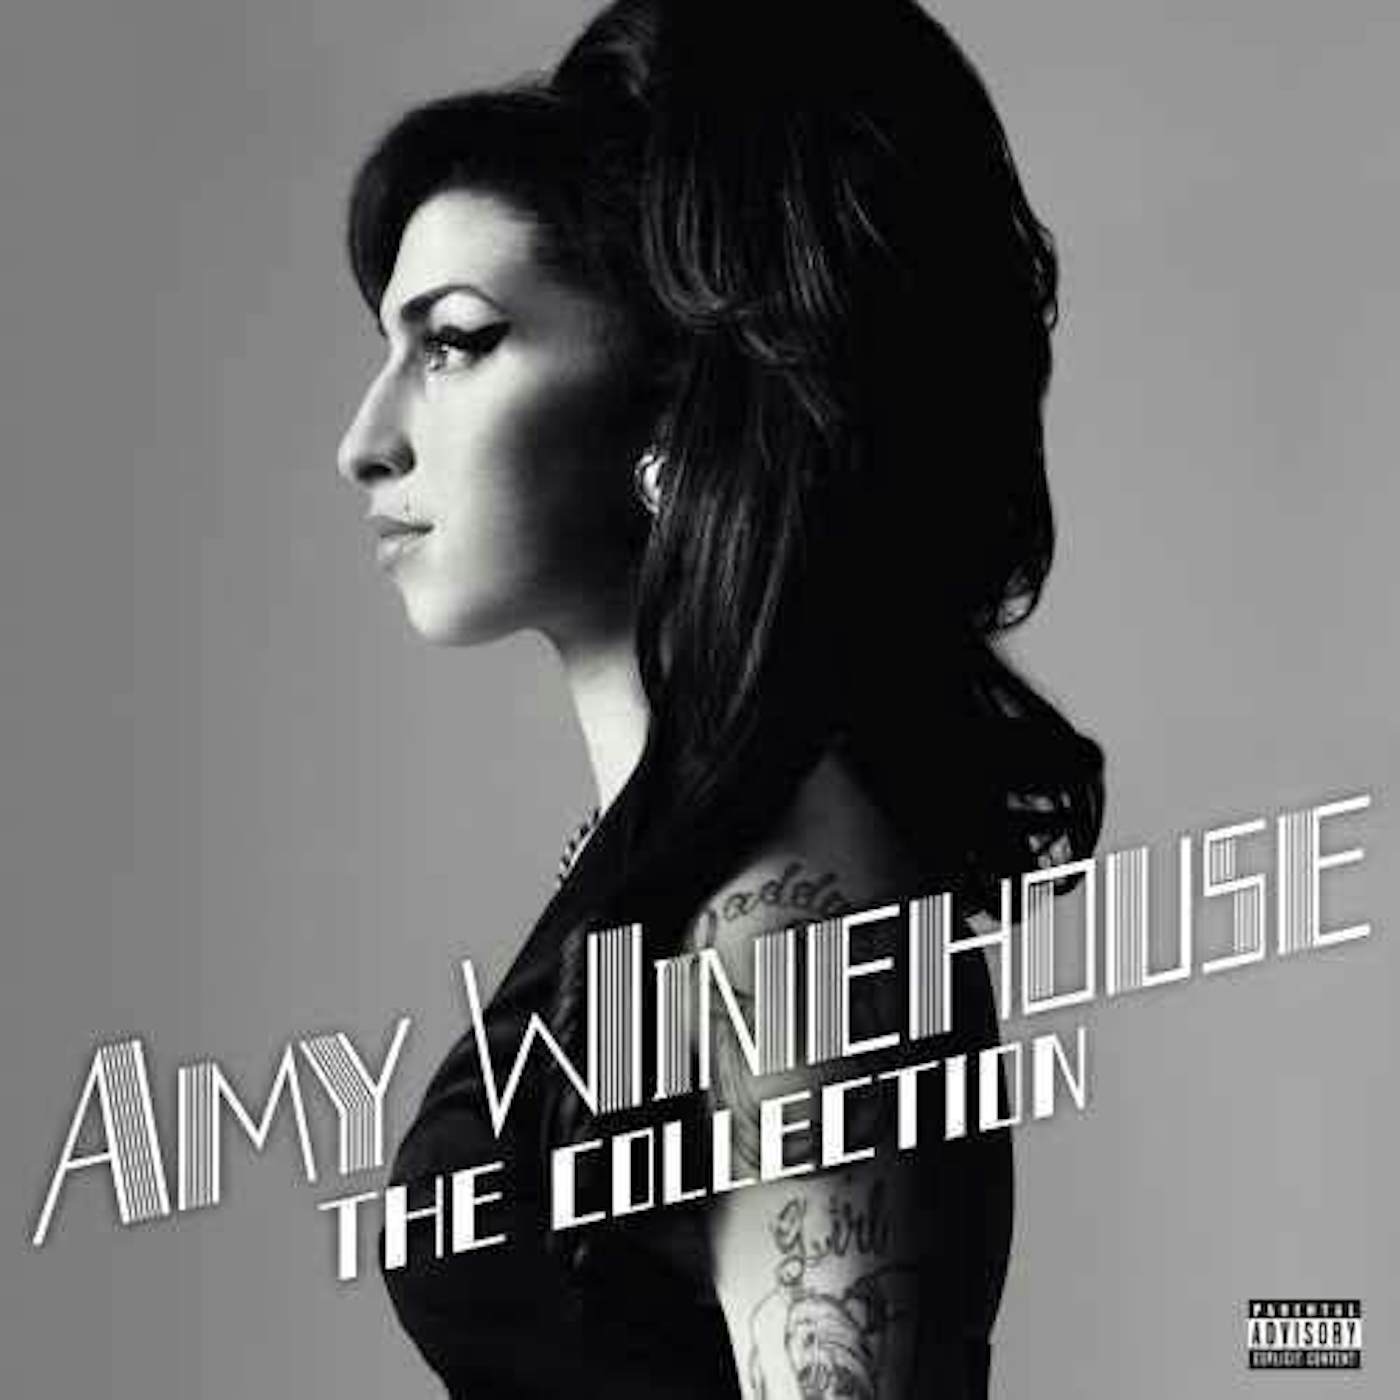 Half-Speed Vinyl Edition Of Amy Winehouse's Frank Set For Release